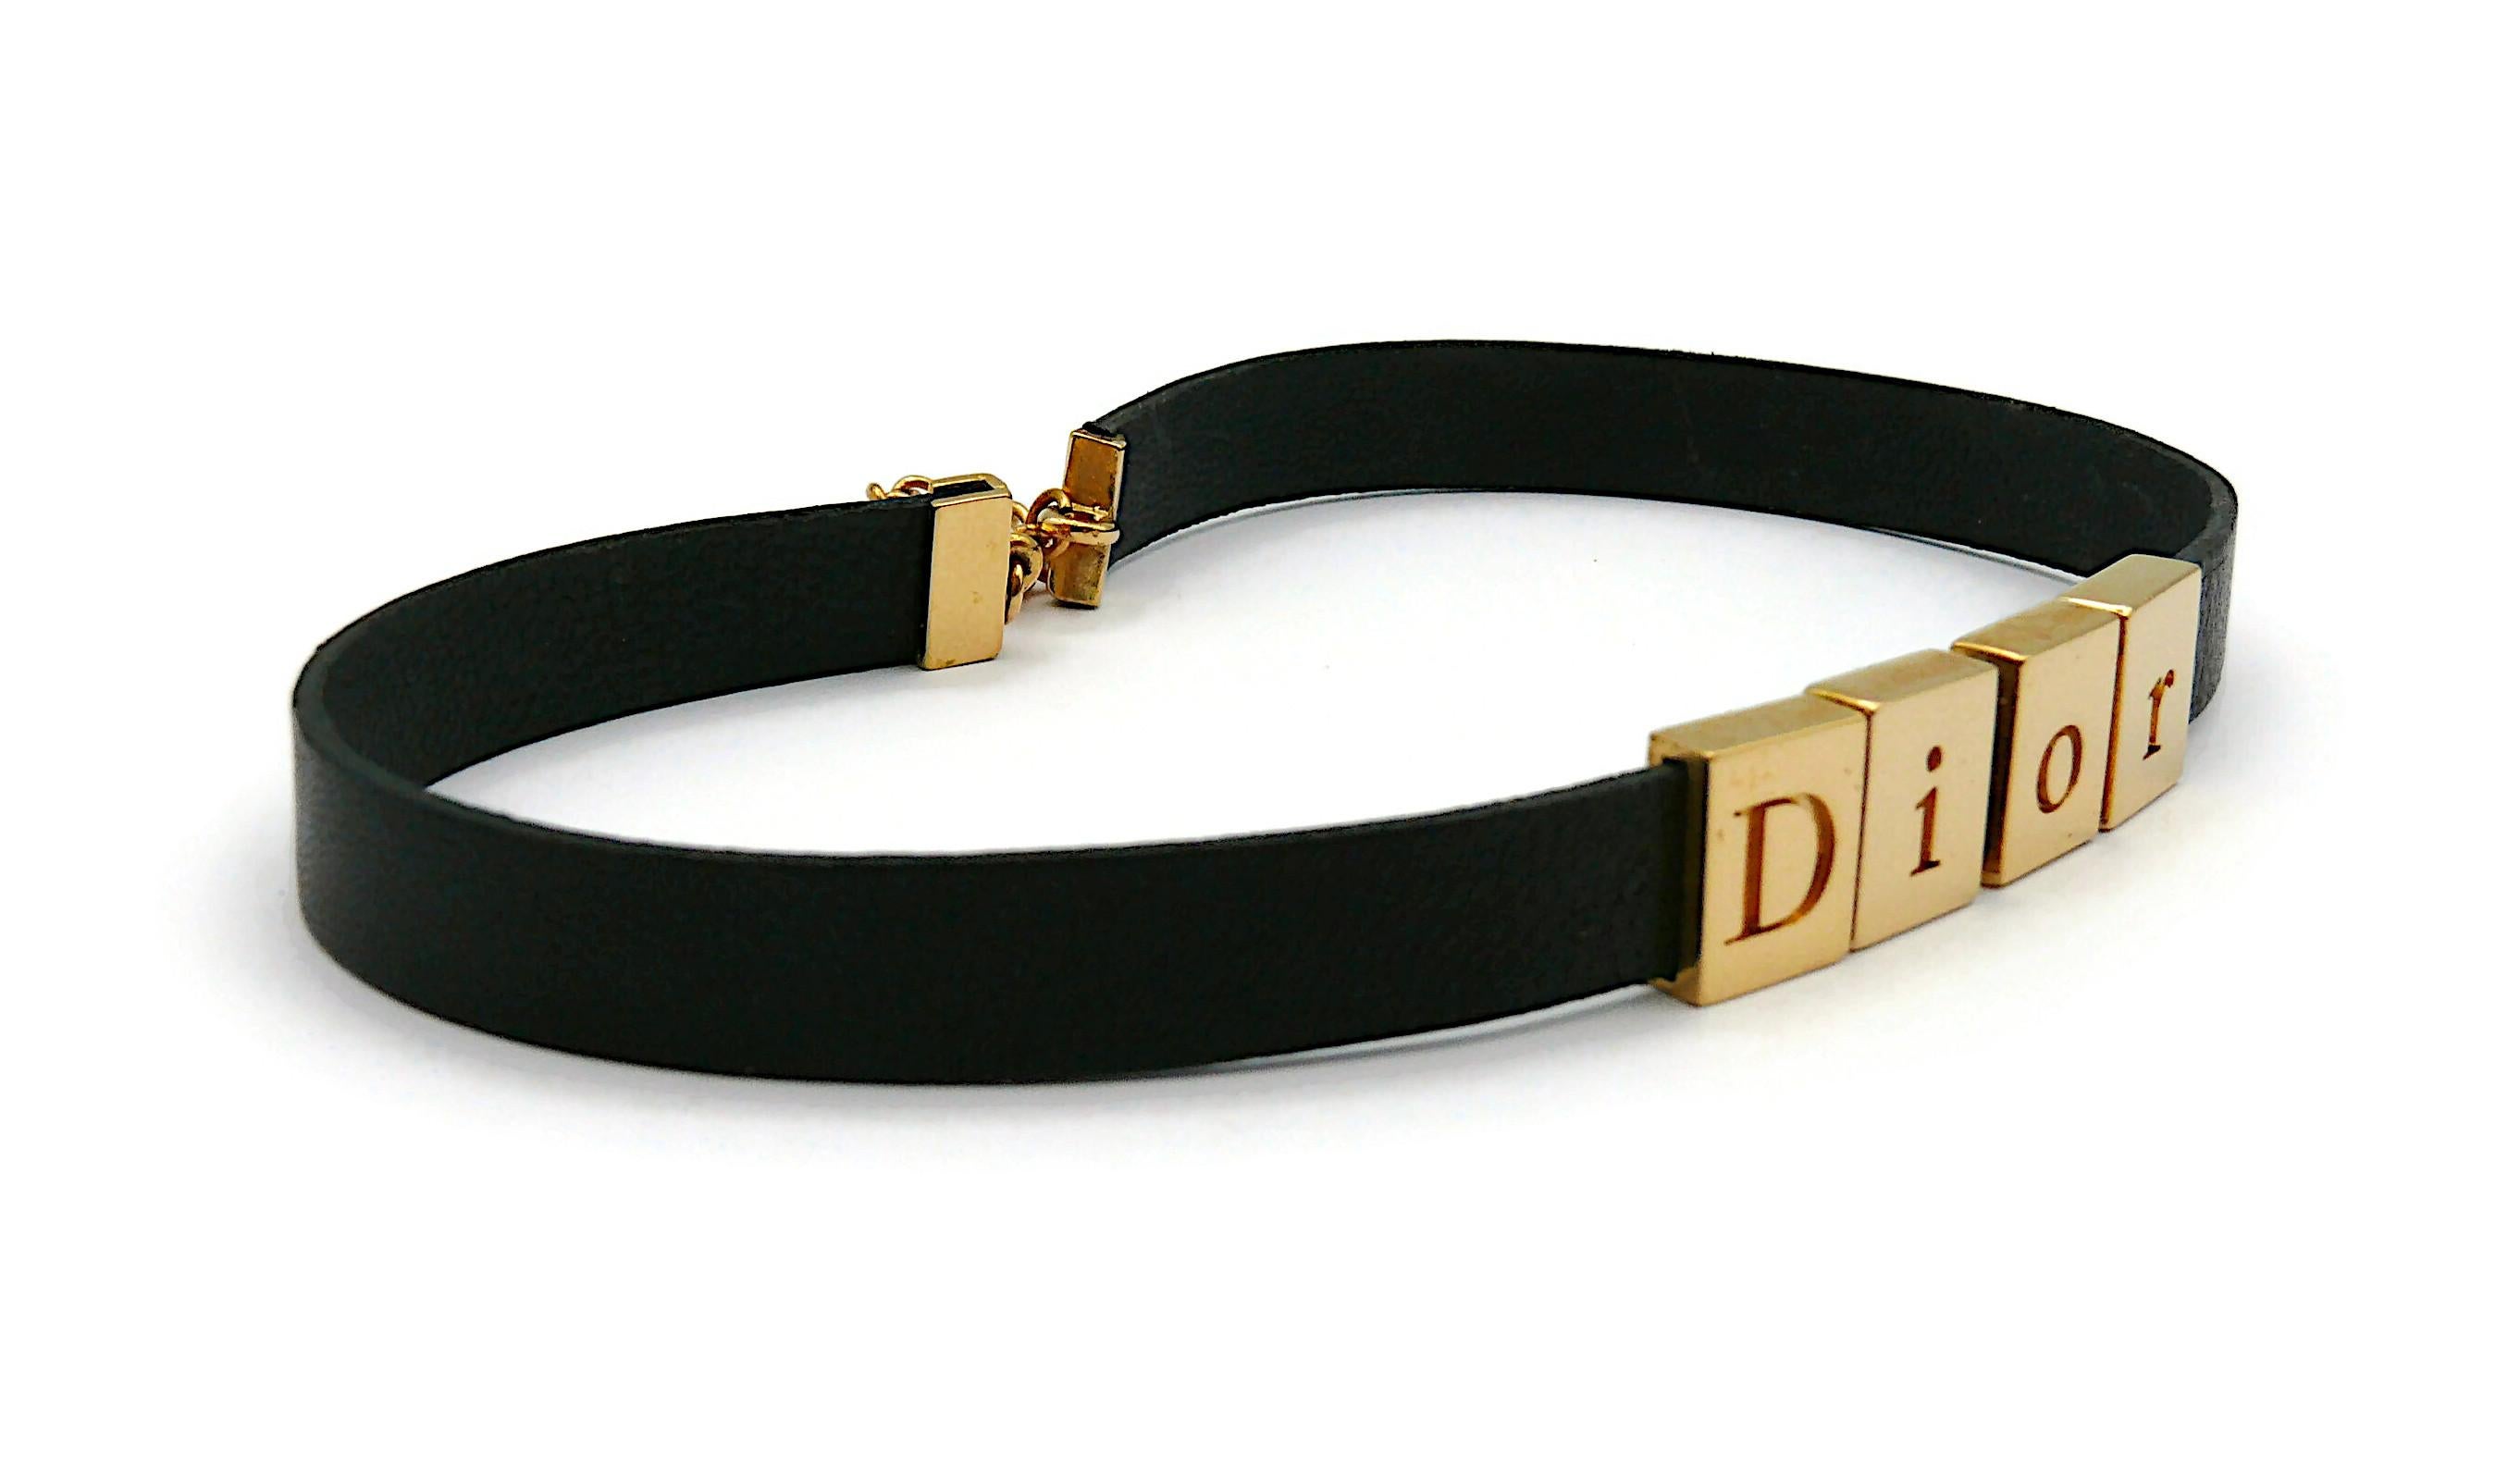 CHRISTIAN DIOR Black Leather D I O R Choker Necklace In Good Condition For Sale In Nice, FR